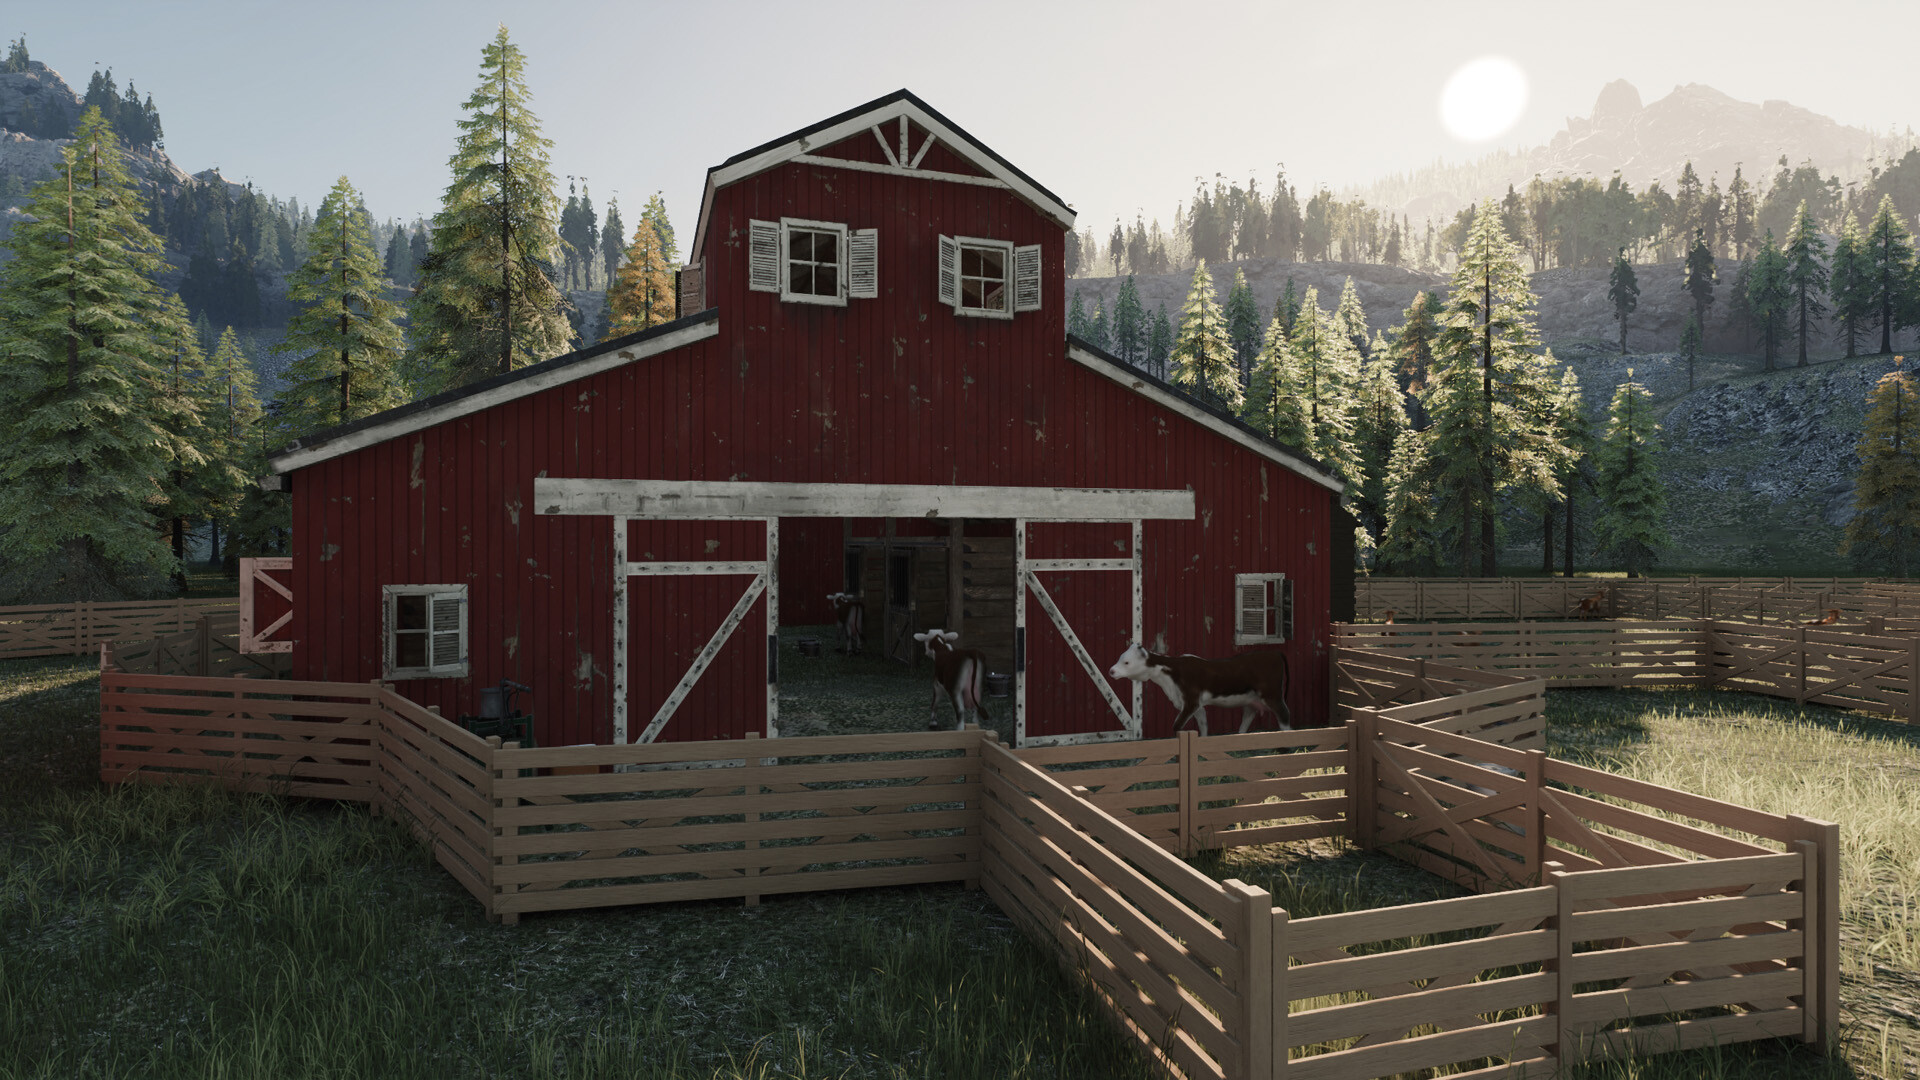 House Flipper meets Red Dead Redemption 2 in Steam simulation game